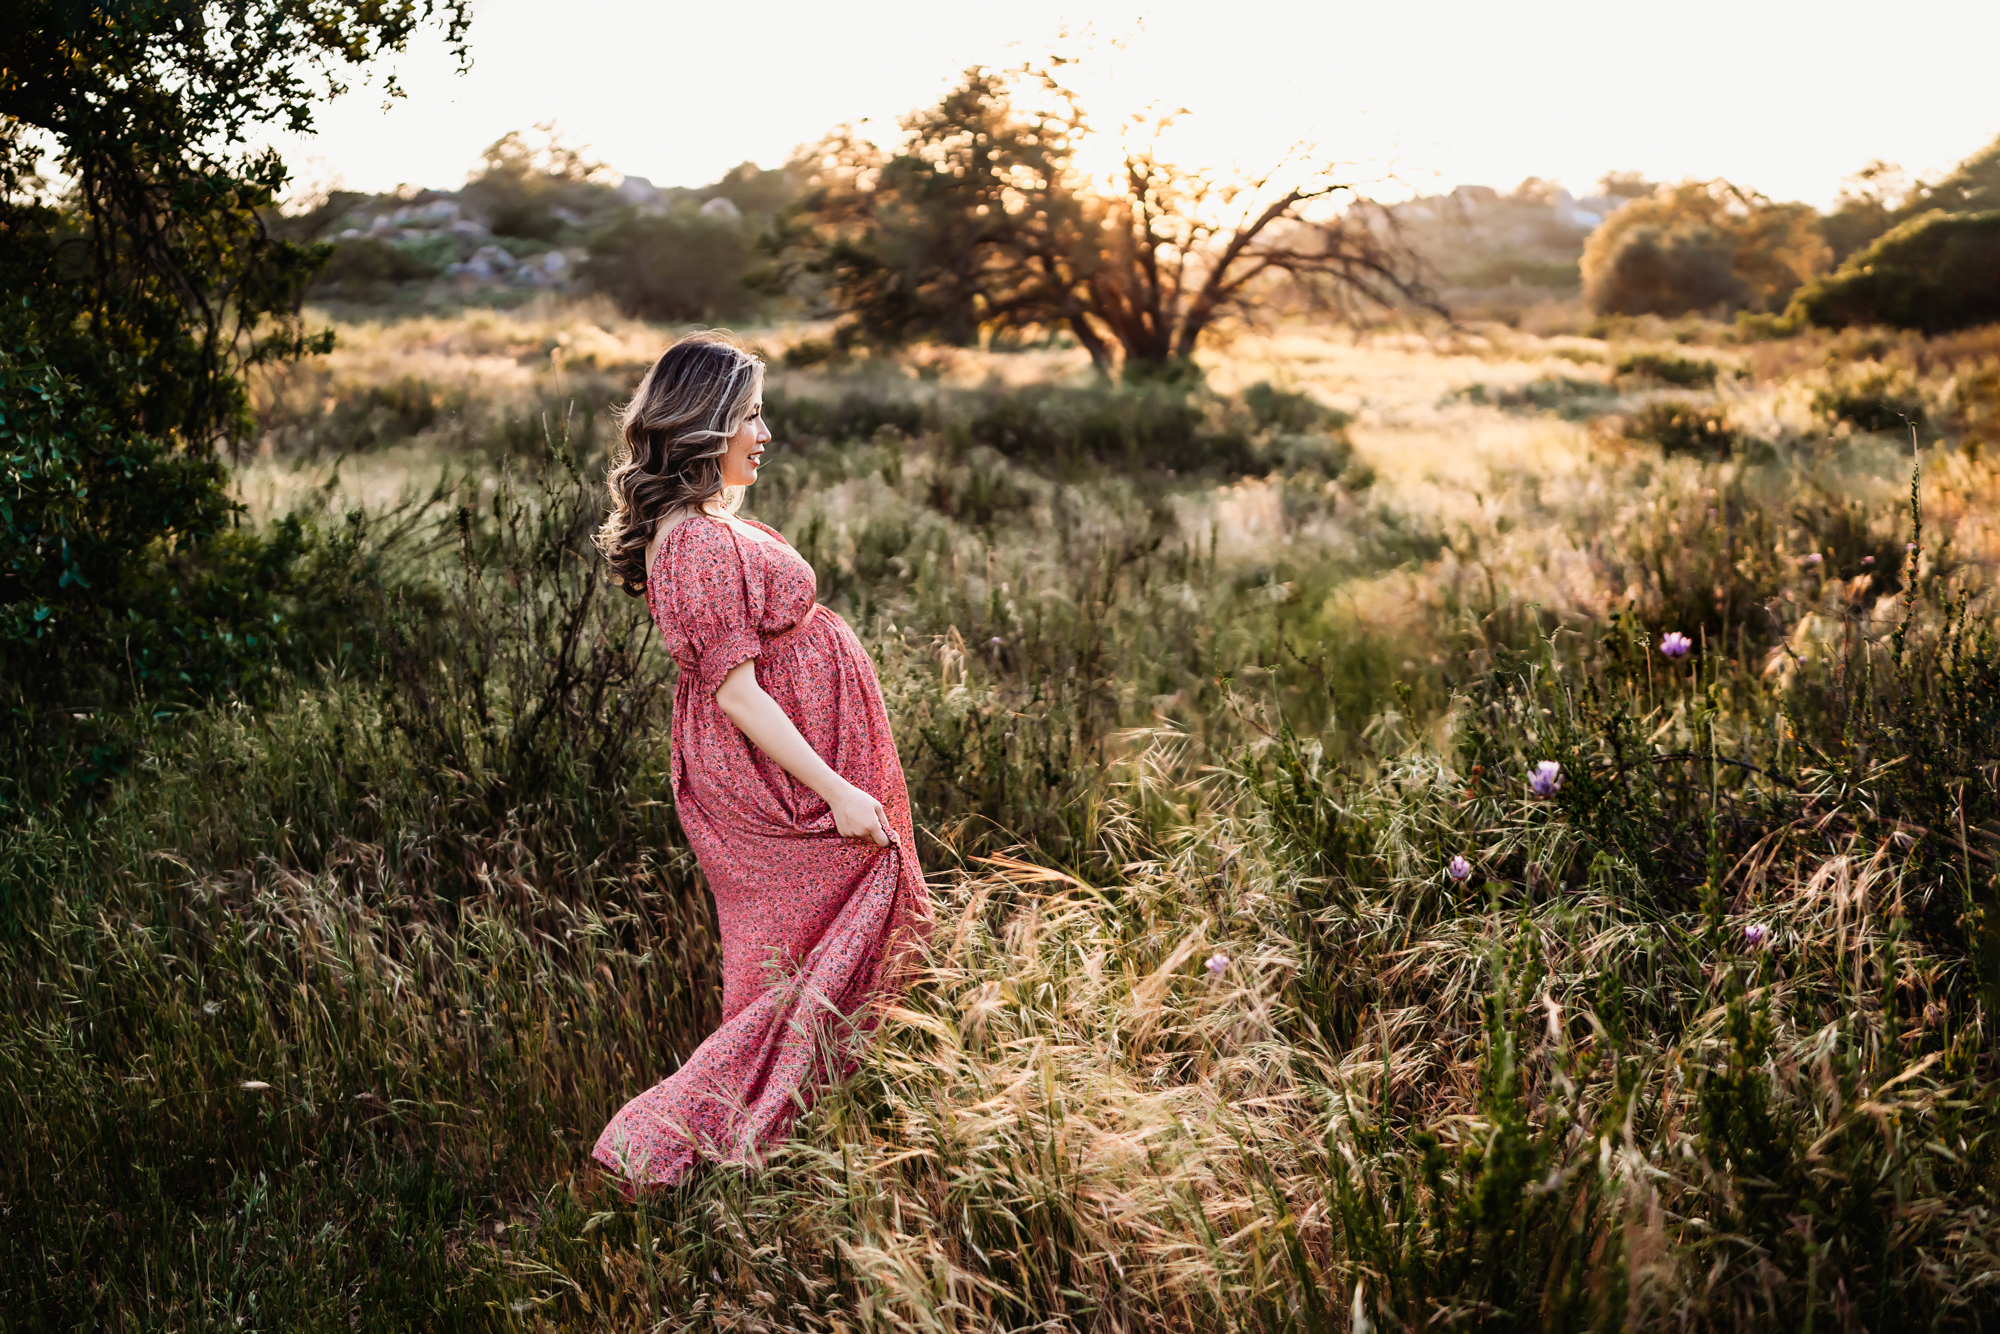 A pregnant woman wearing a pink dress walks through long grass in a field. This is during a San Diego lifestyle maternity photo session by Love Michelle Photography.